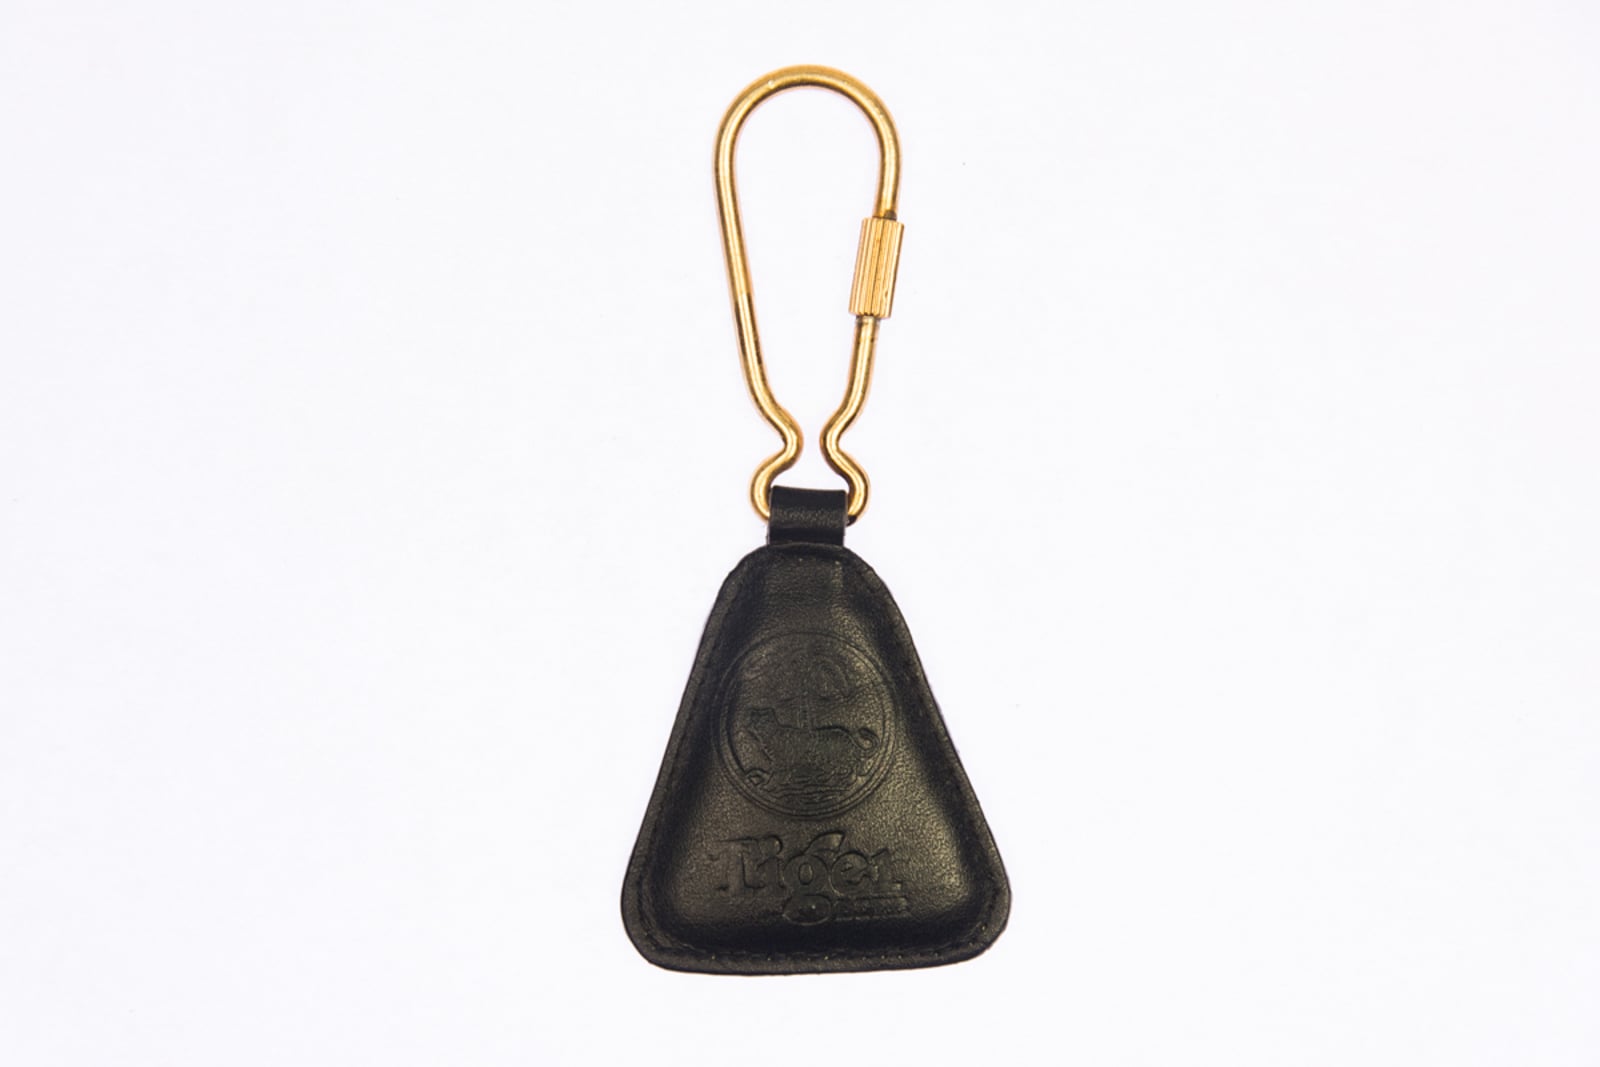 Tiger Beer Black Leather Key Chain